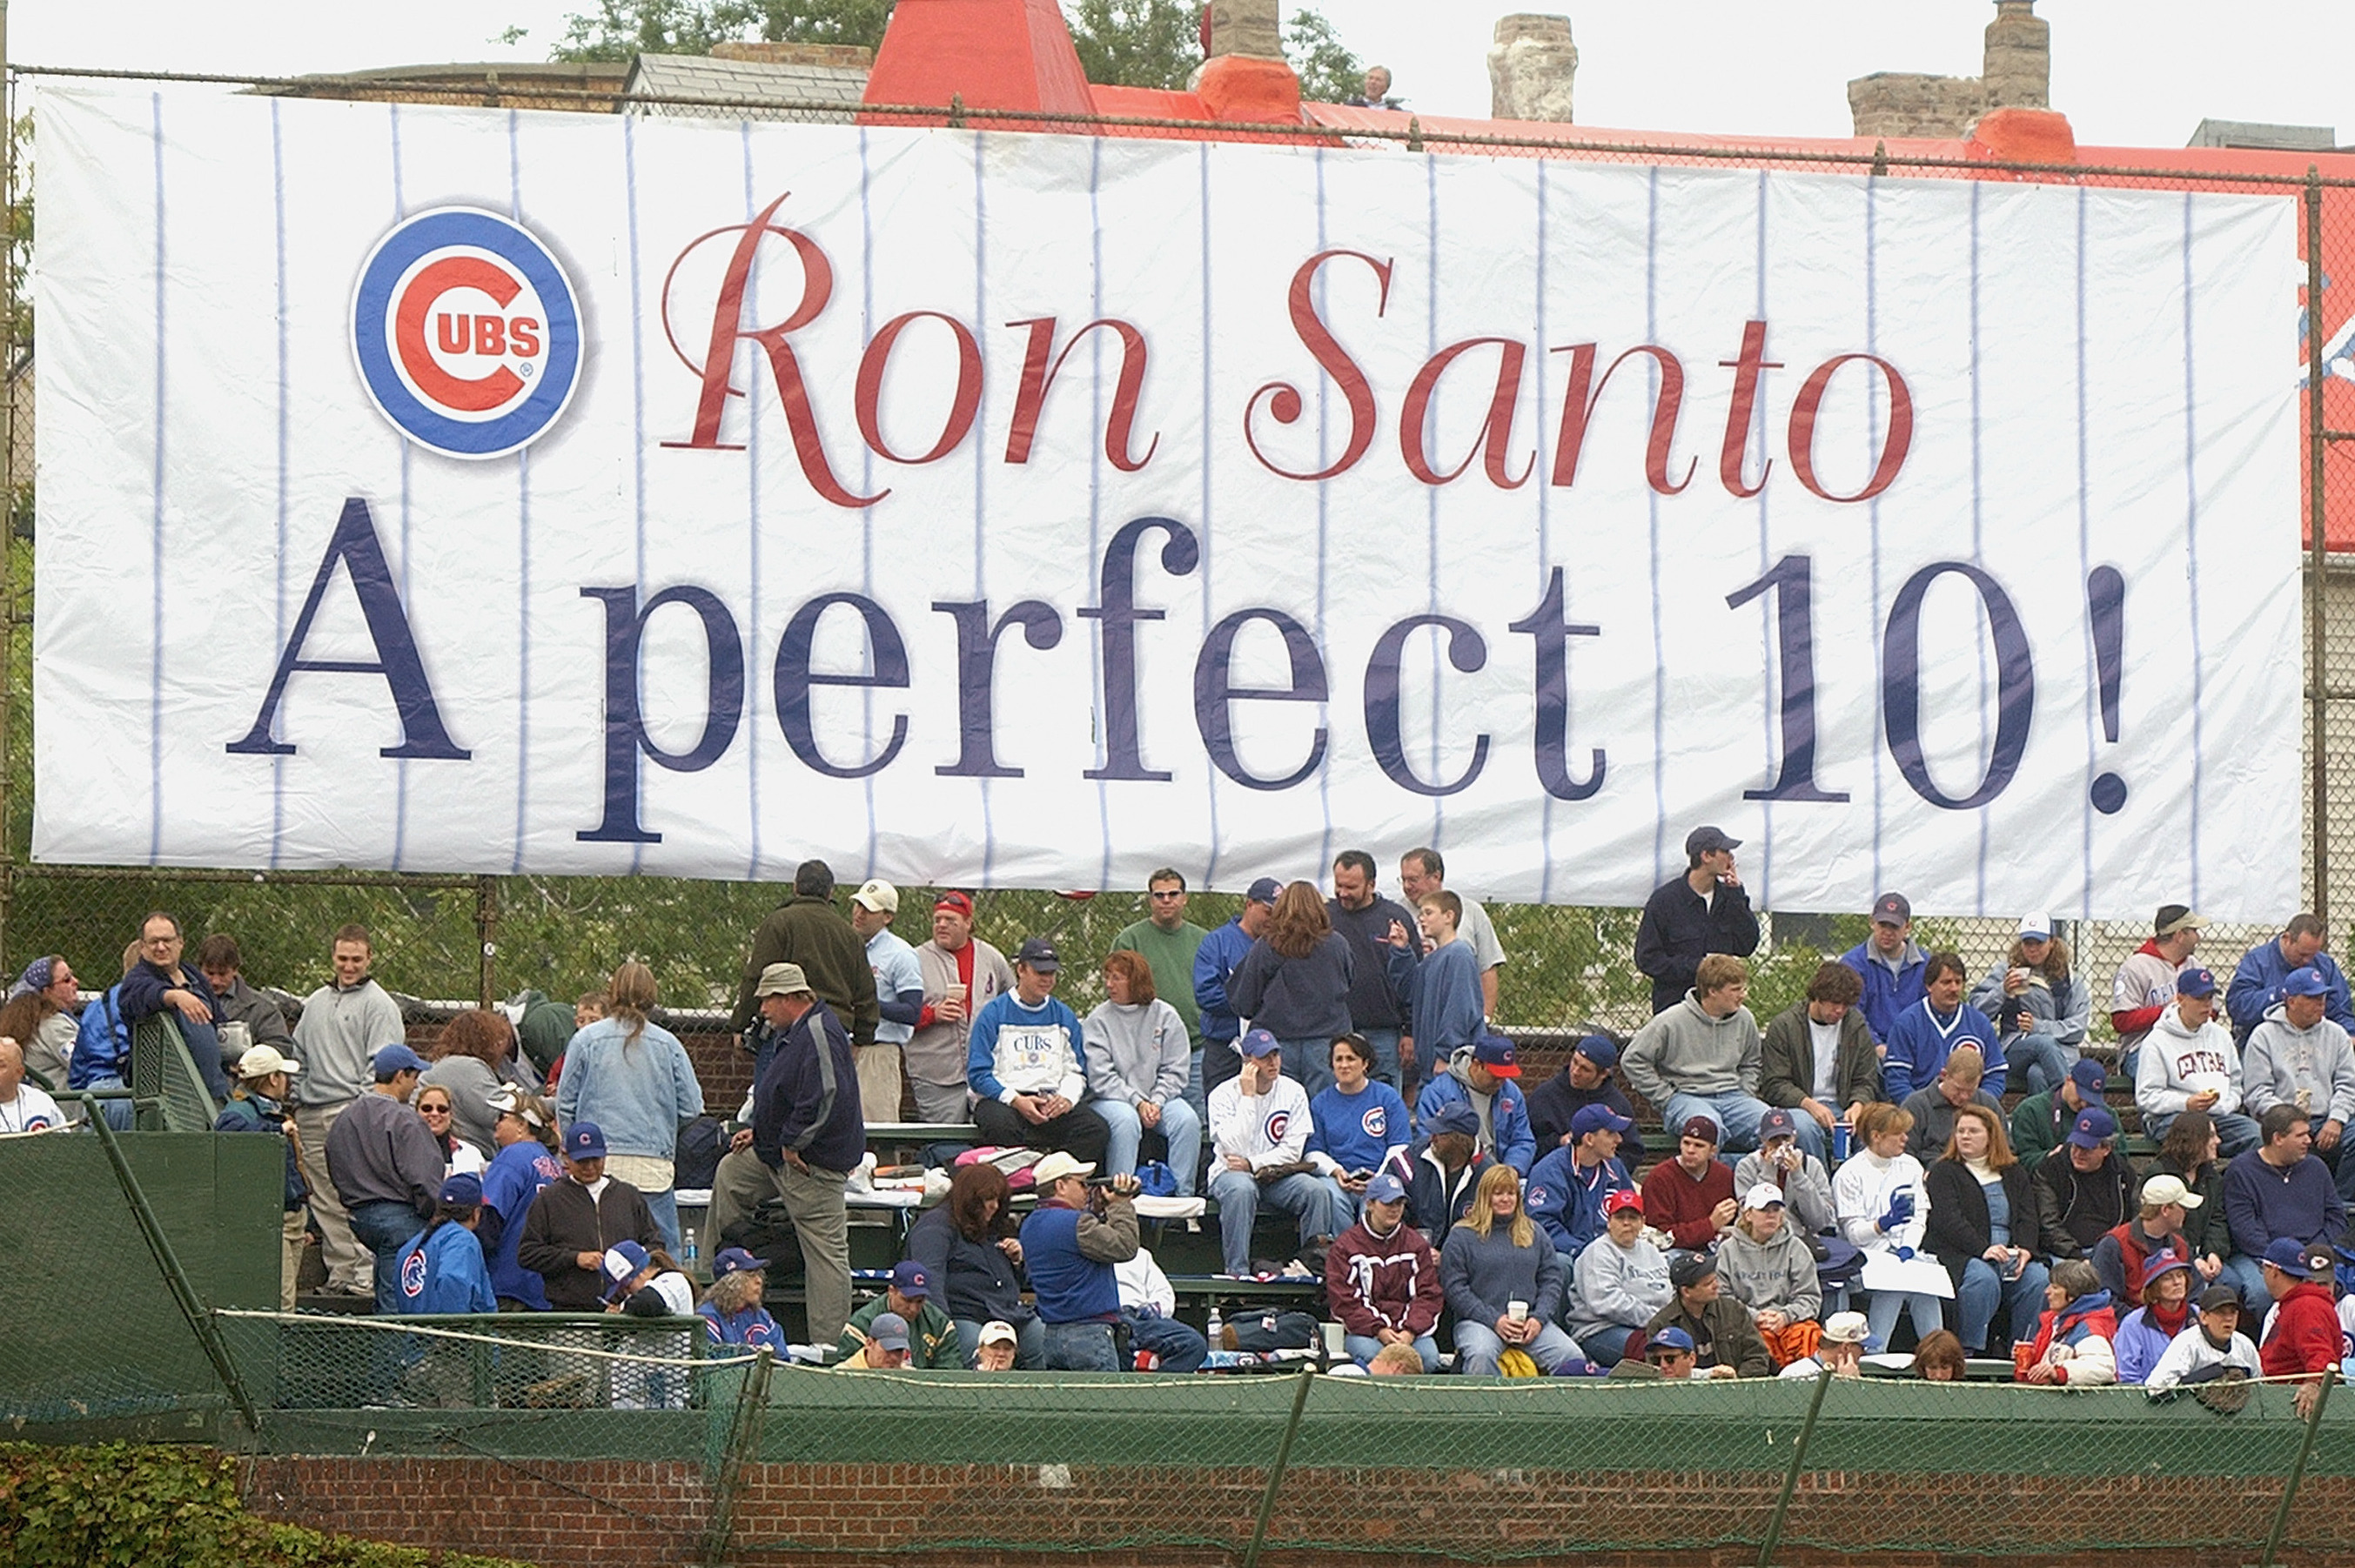 Cubs great Ron Santo elected to Hall of Fame